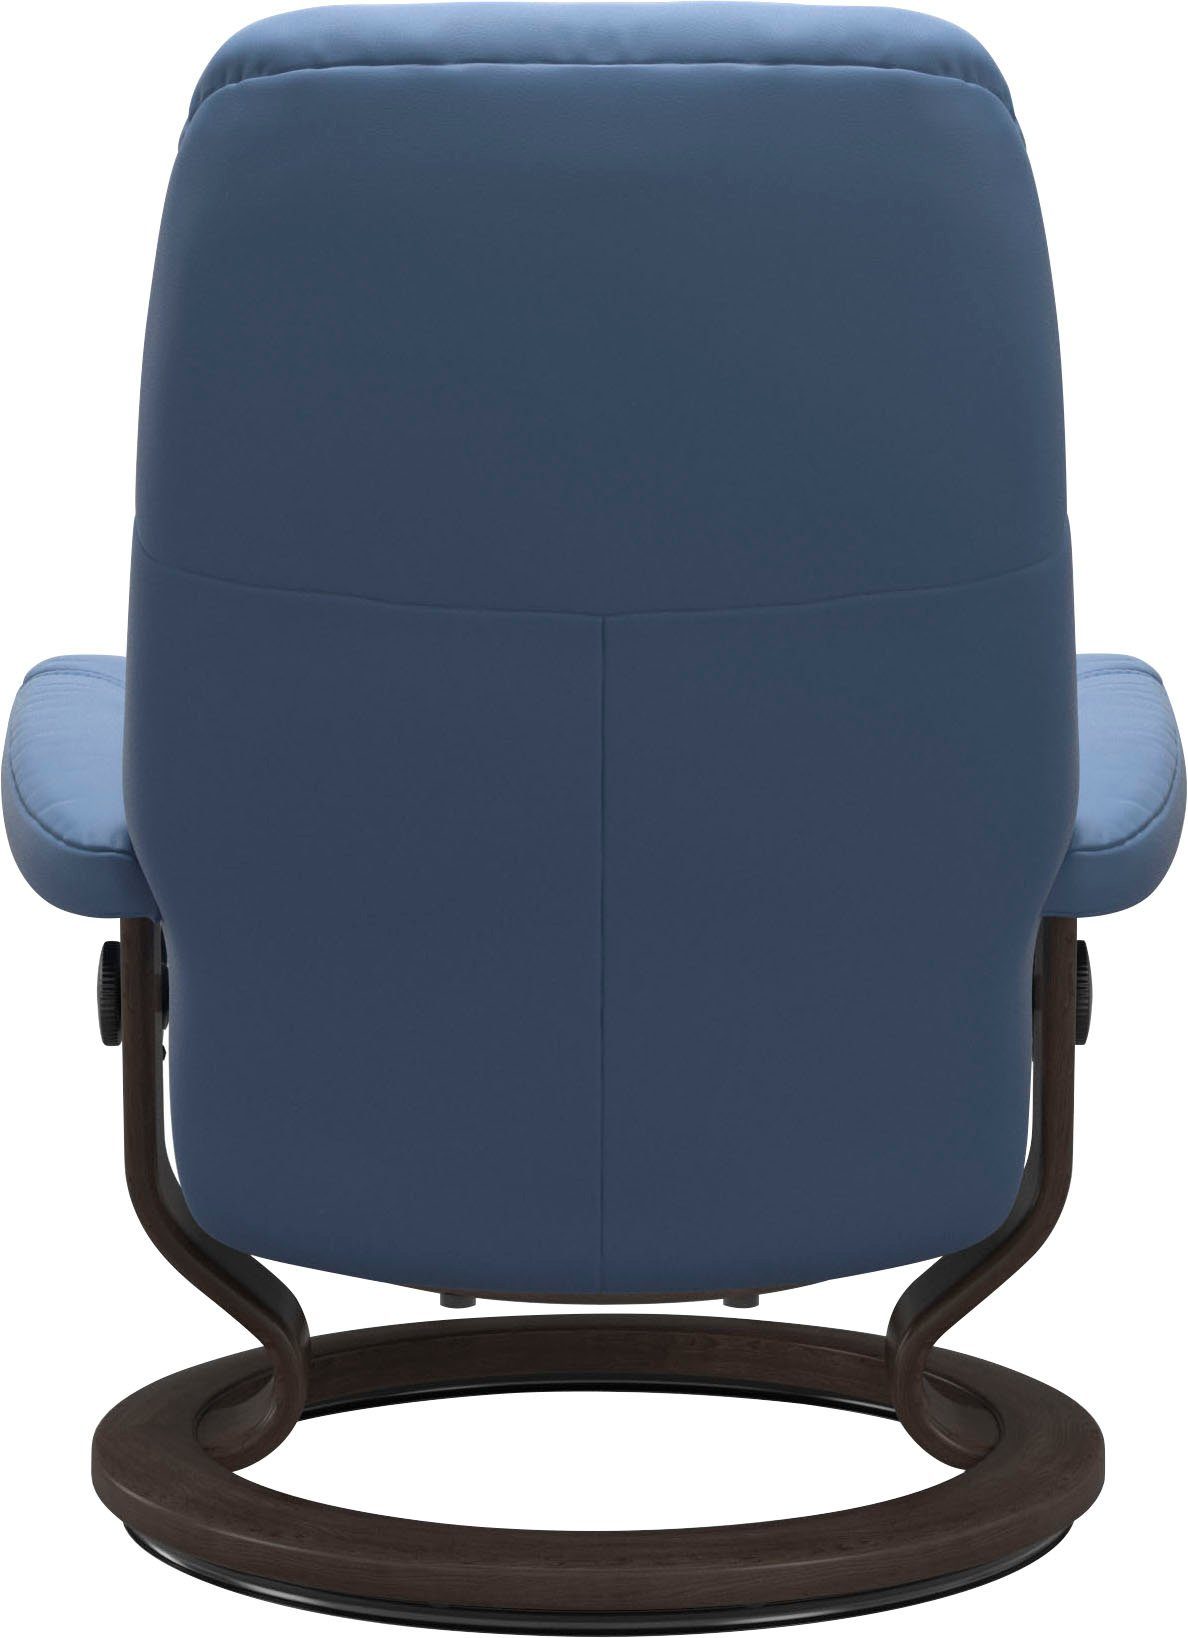 Consul, Wenge Gestell Base, Classic S, Stressless® mit Größe Relaxsessel